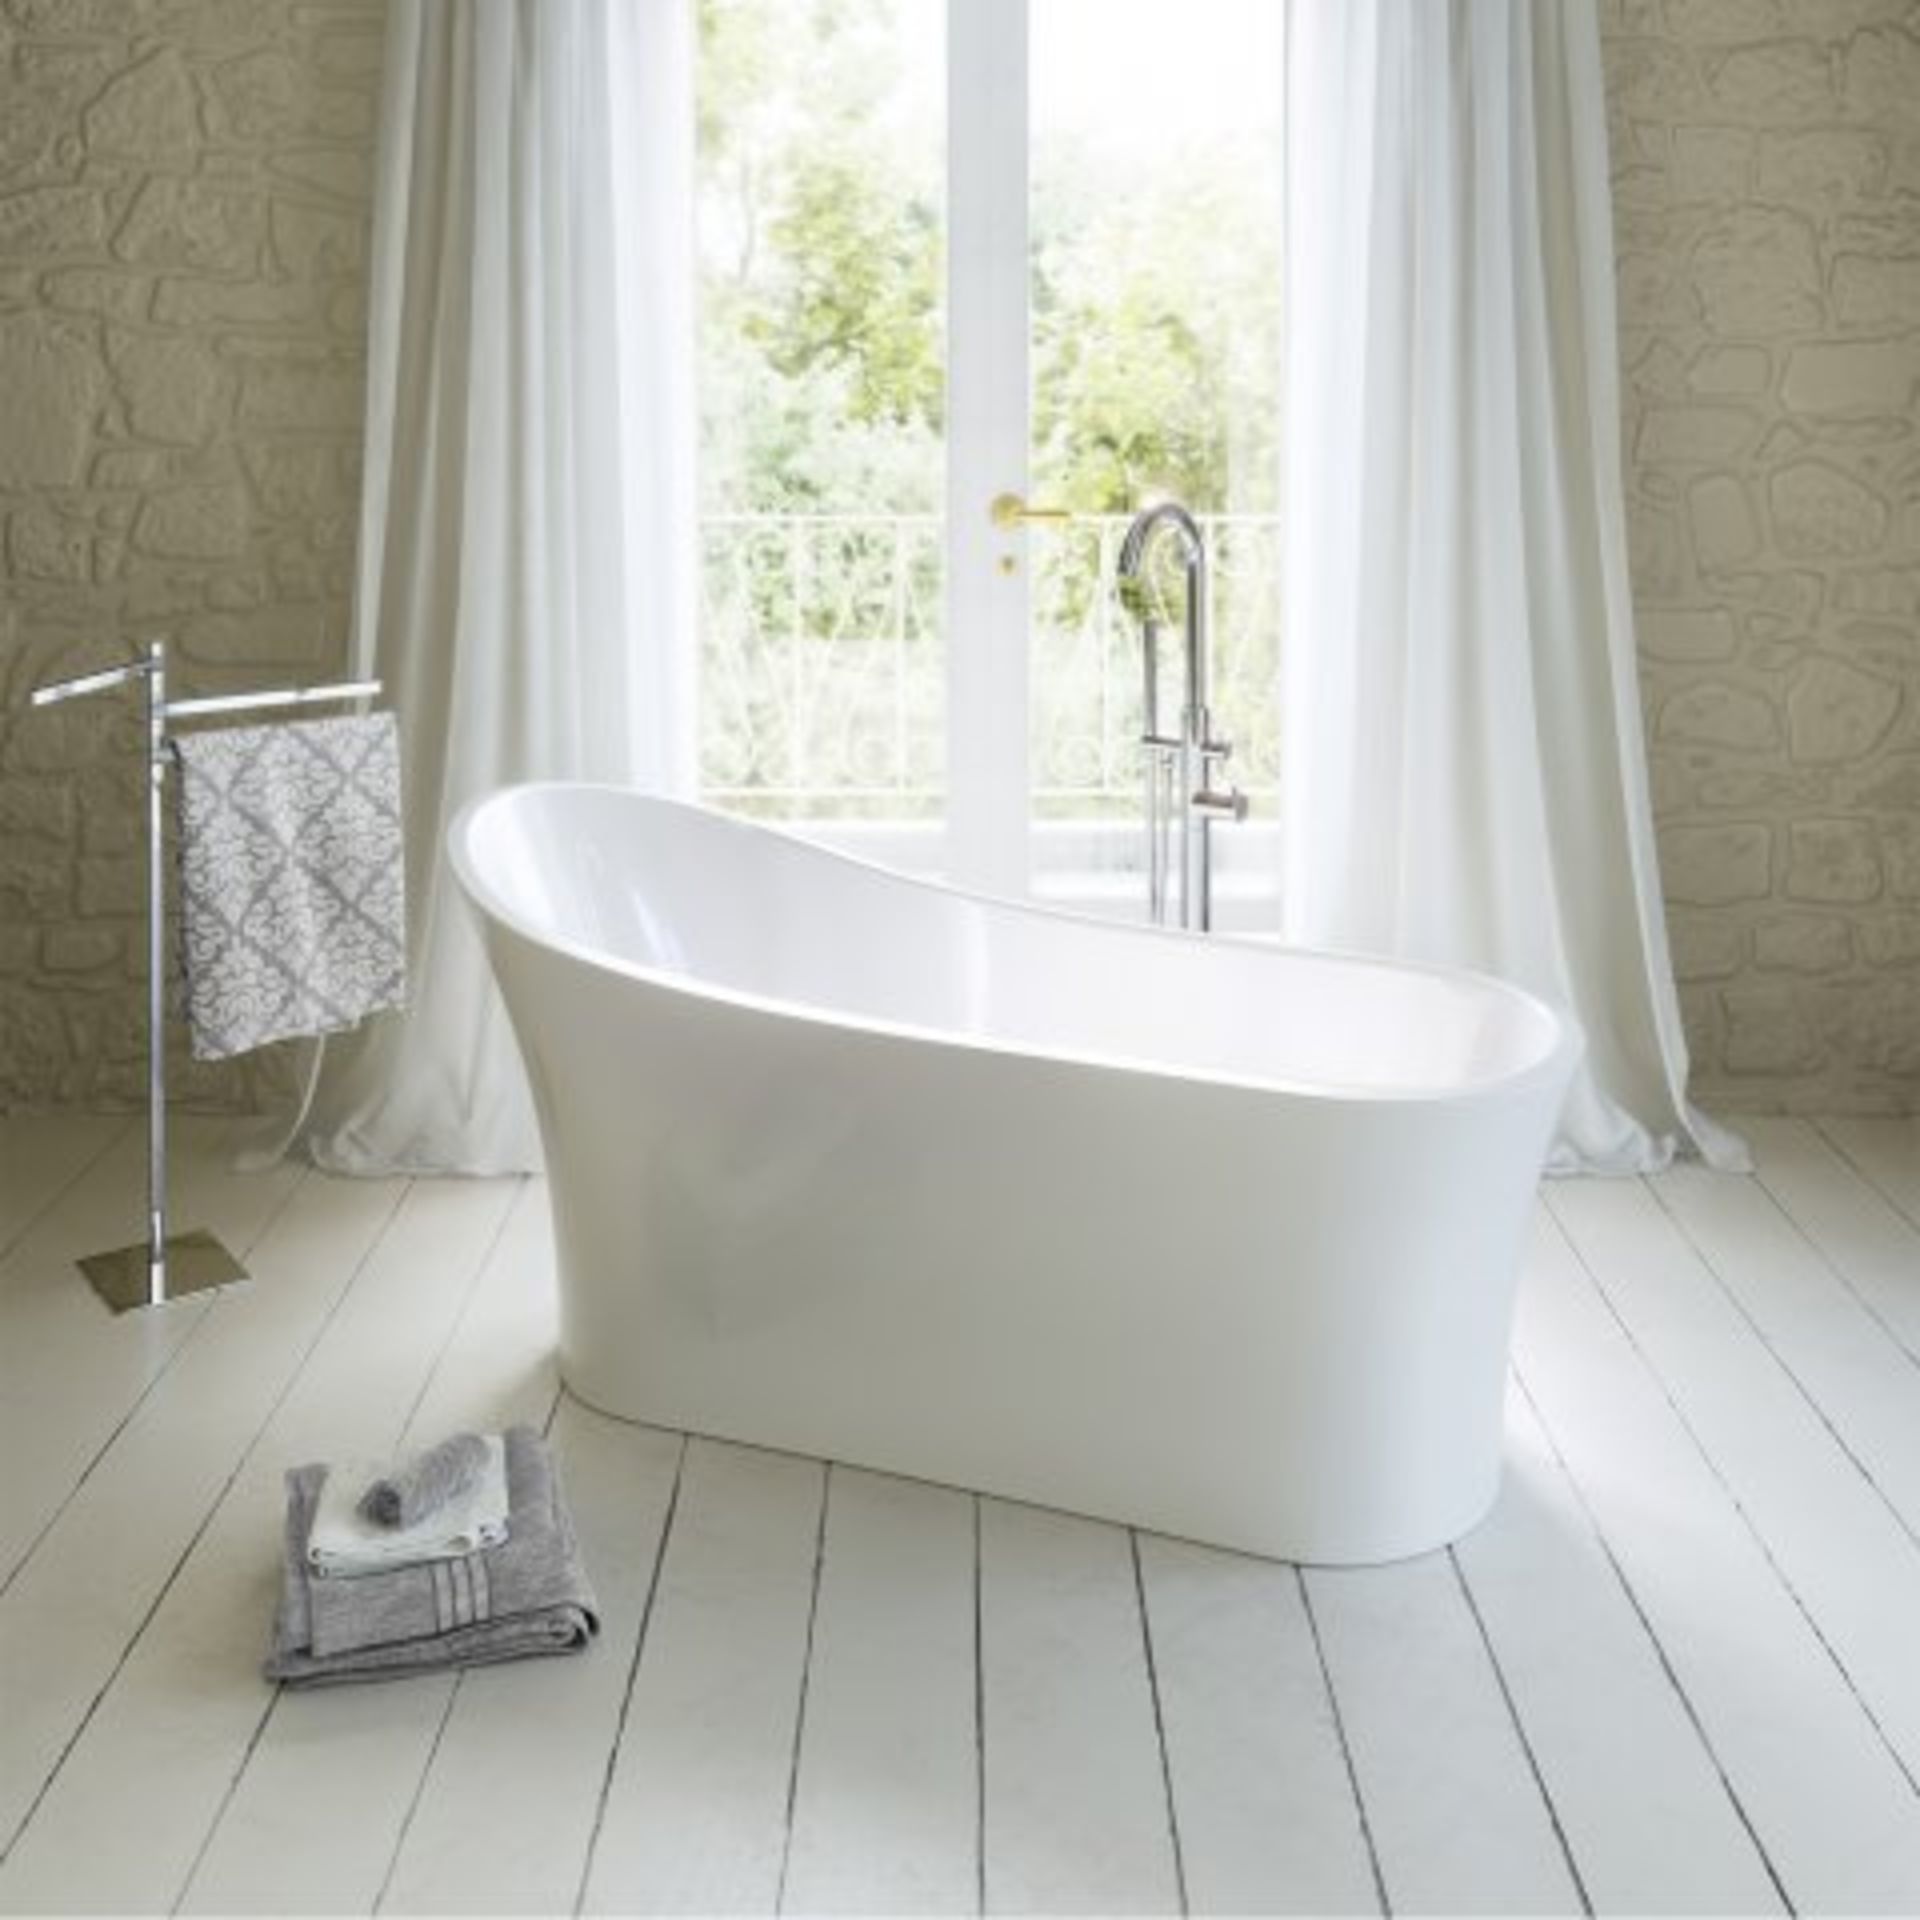 New (K3) 1650 x 690mm Madison Freestanding Bath - Large. RRP £2,499. This Gloss White Free-Sta... - Image 2 of 3